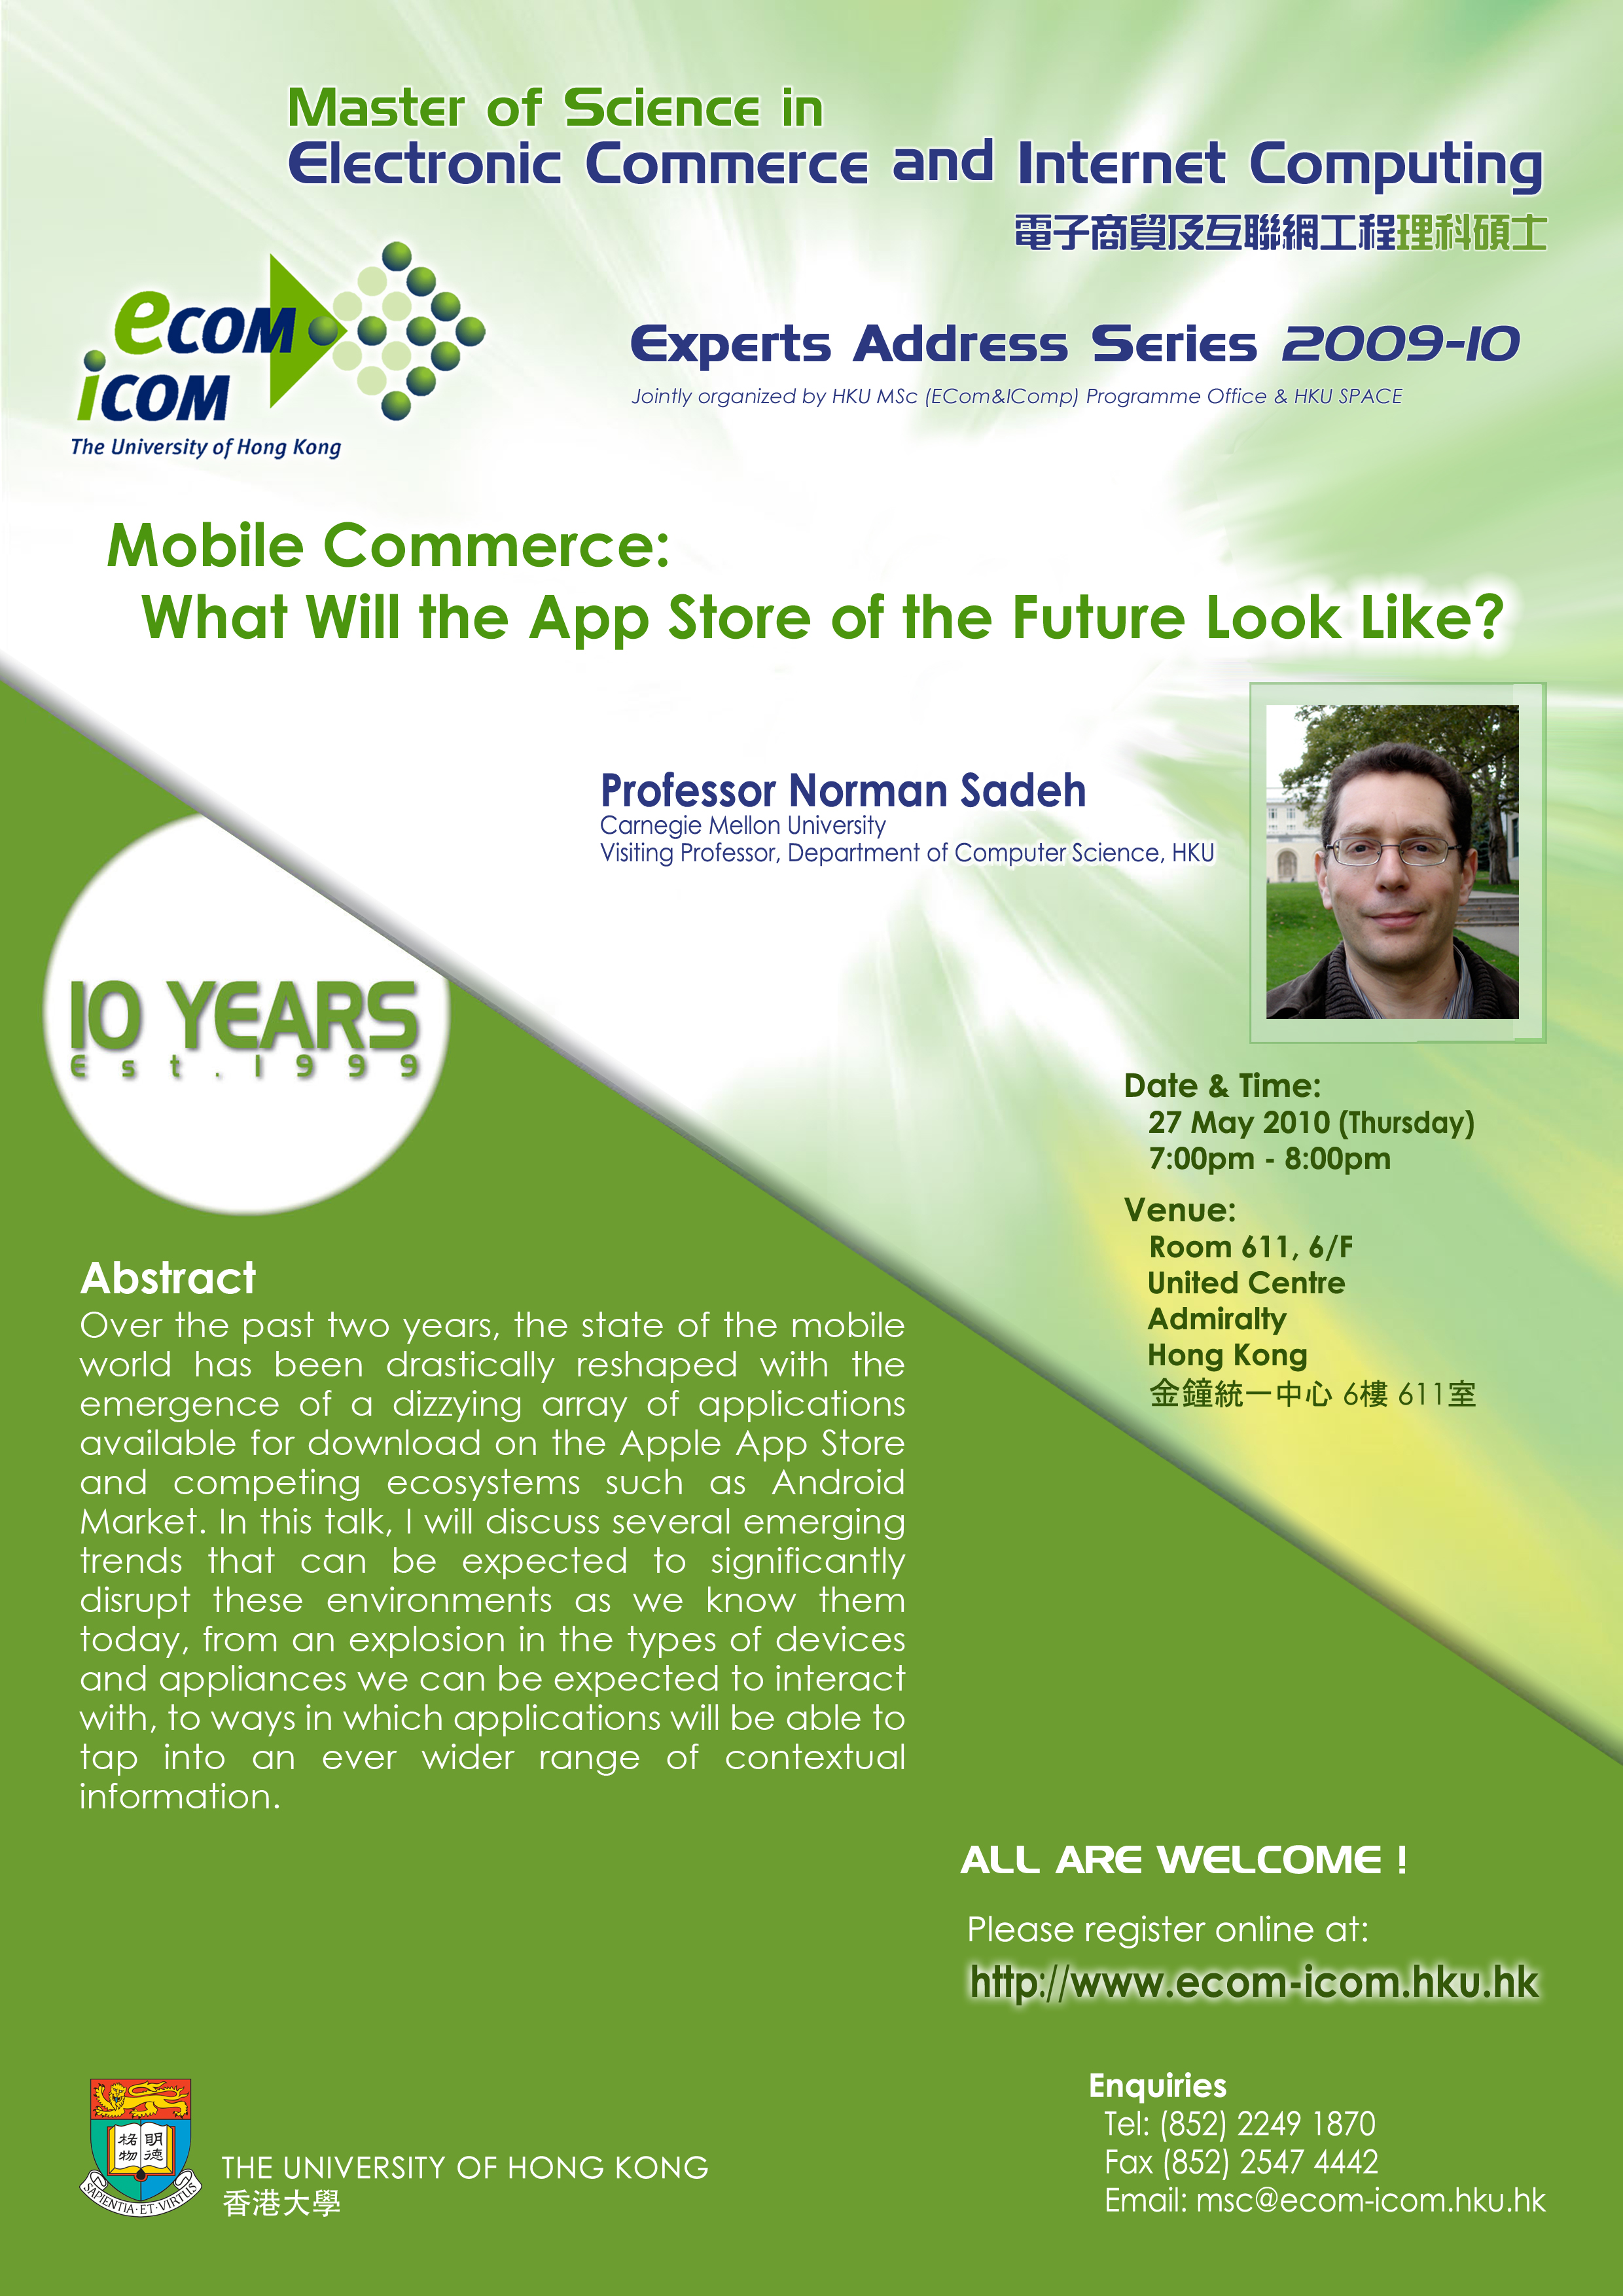 MSc(ECom&IComp) Expert Address: Mobile Commerce: What Will the App Store of the Future Look Like?